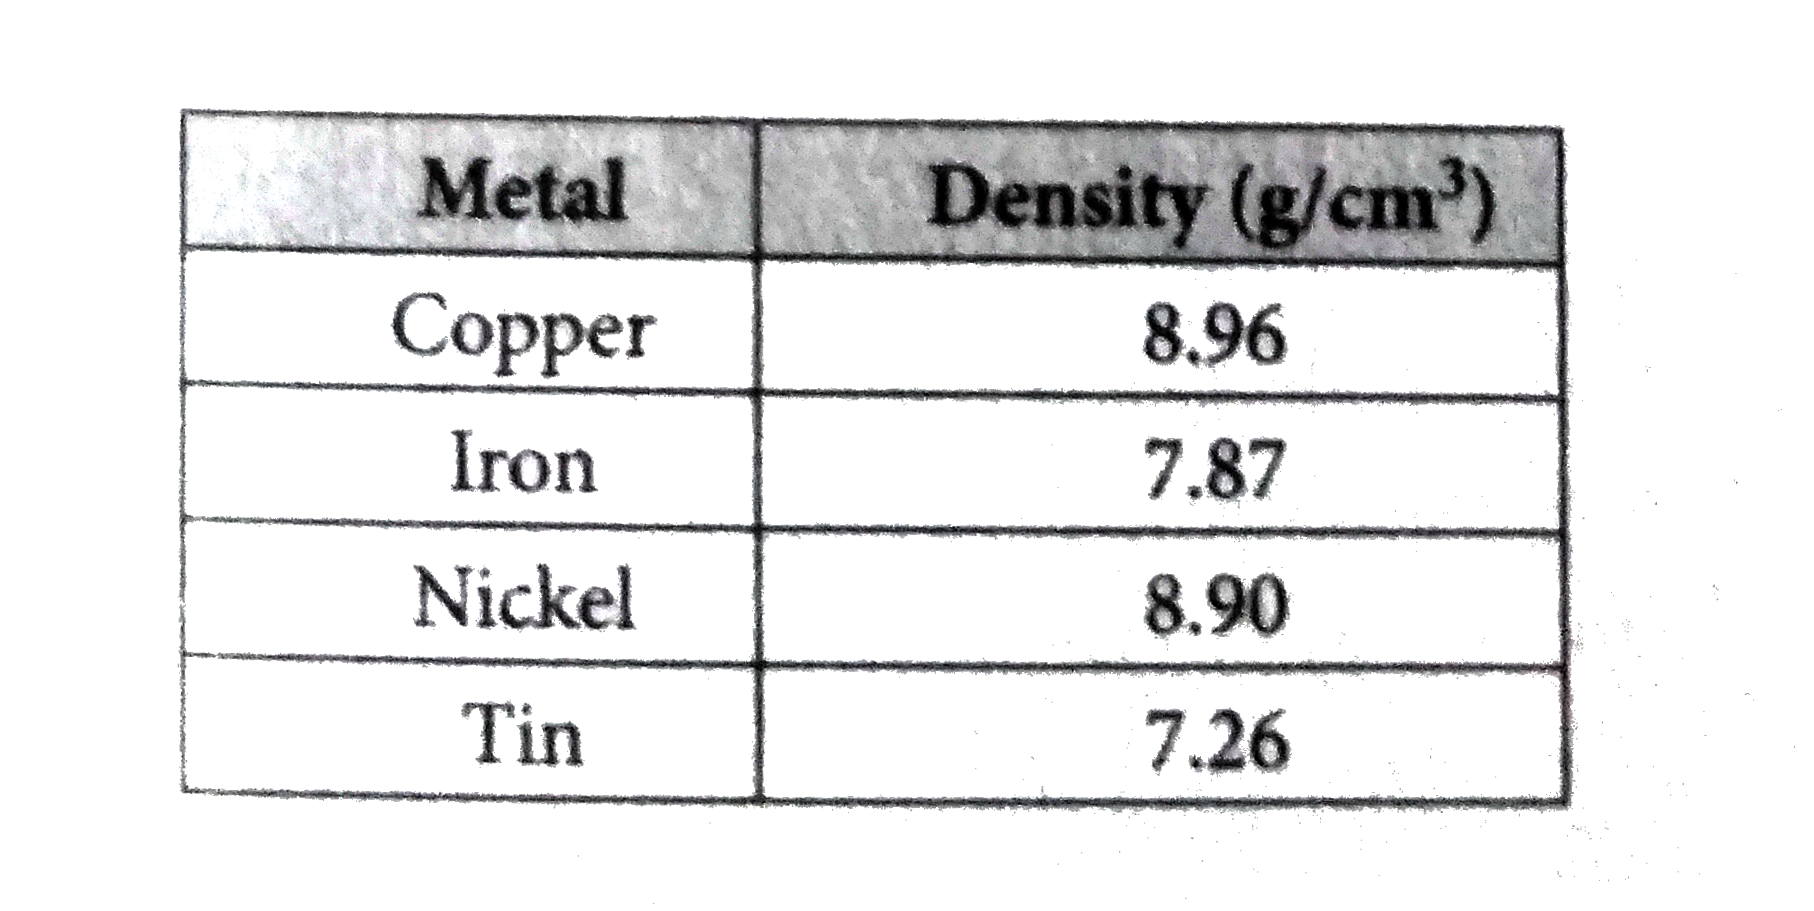 The density of a subtance can be found by dividing the mass of the substance by the volume of the substance. The table gives the density of several pure metals in grams per cubic centimeter. Suppose a rectangular sheet of a pure metal weights about 515.9 grams and measures (1)/(4) inch by 2 inches by 8 inches. Assuming the sheet is one of the metals in the table, which metal is it? (There are approximately 2.54 centimeters in 1 inch.)